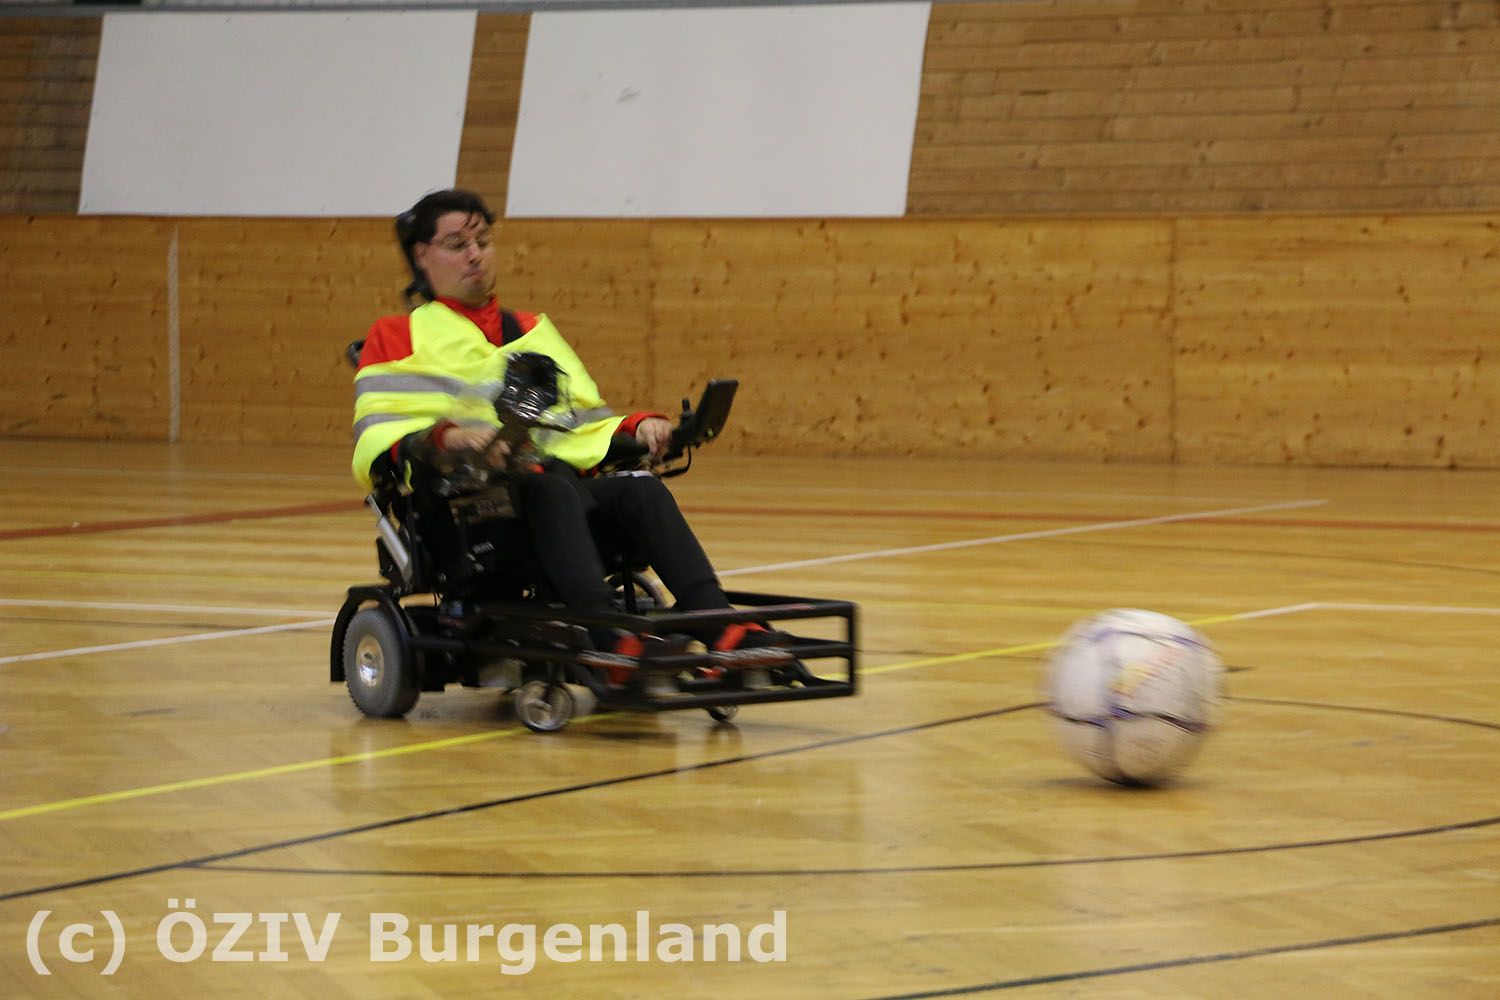 E-Rollifahrer mit Ball in Action